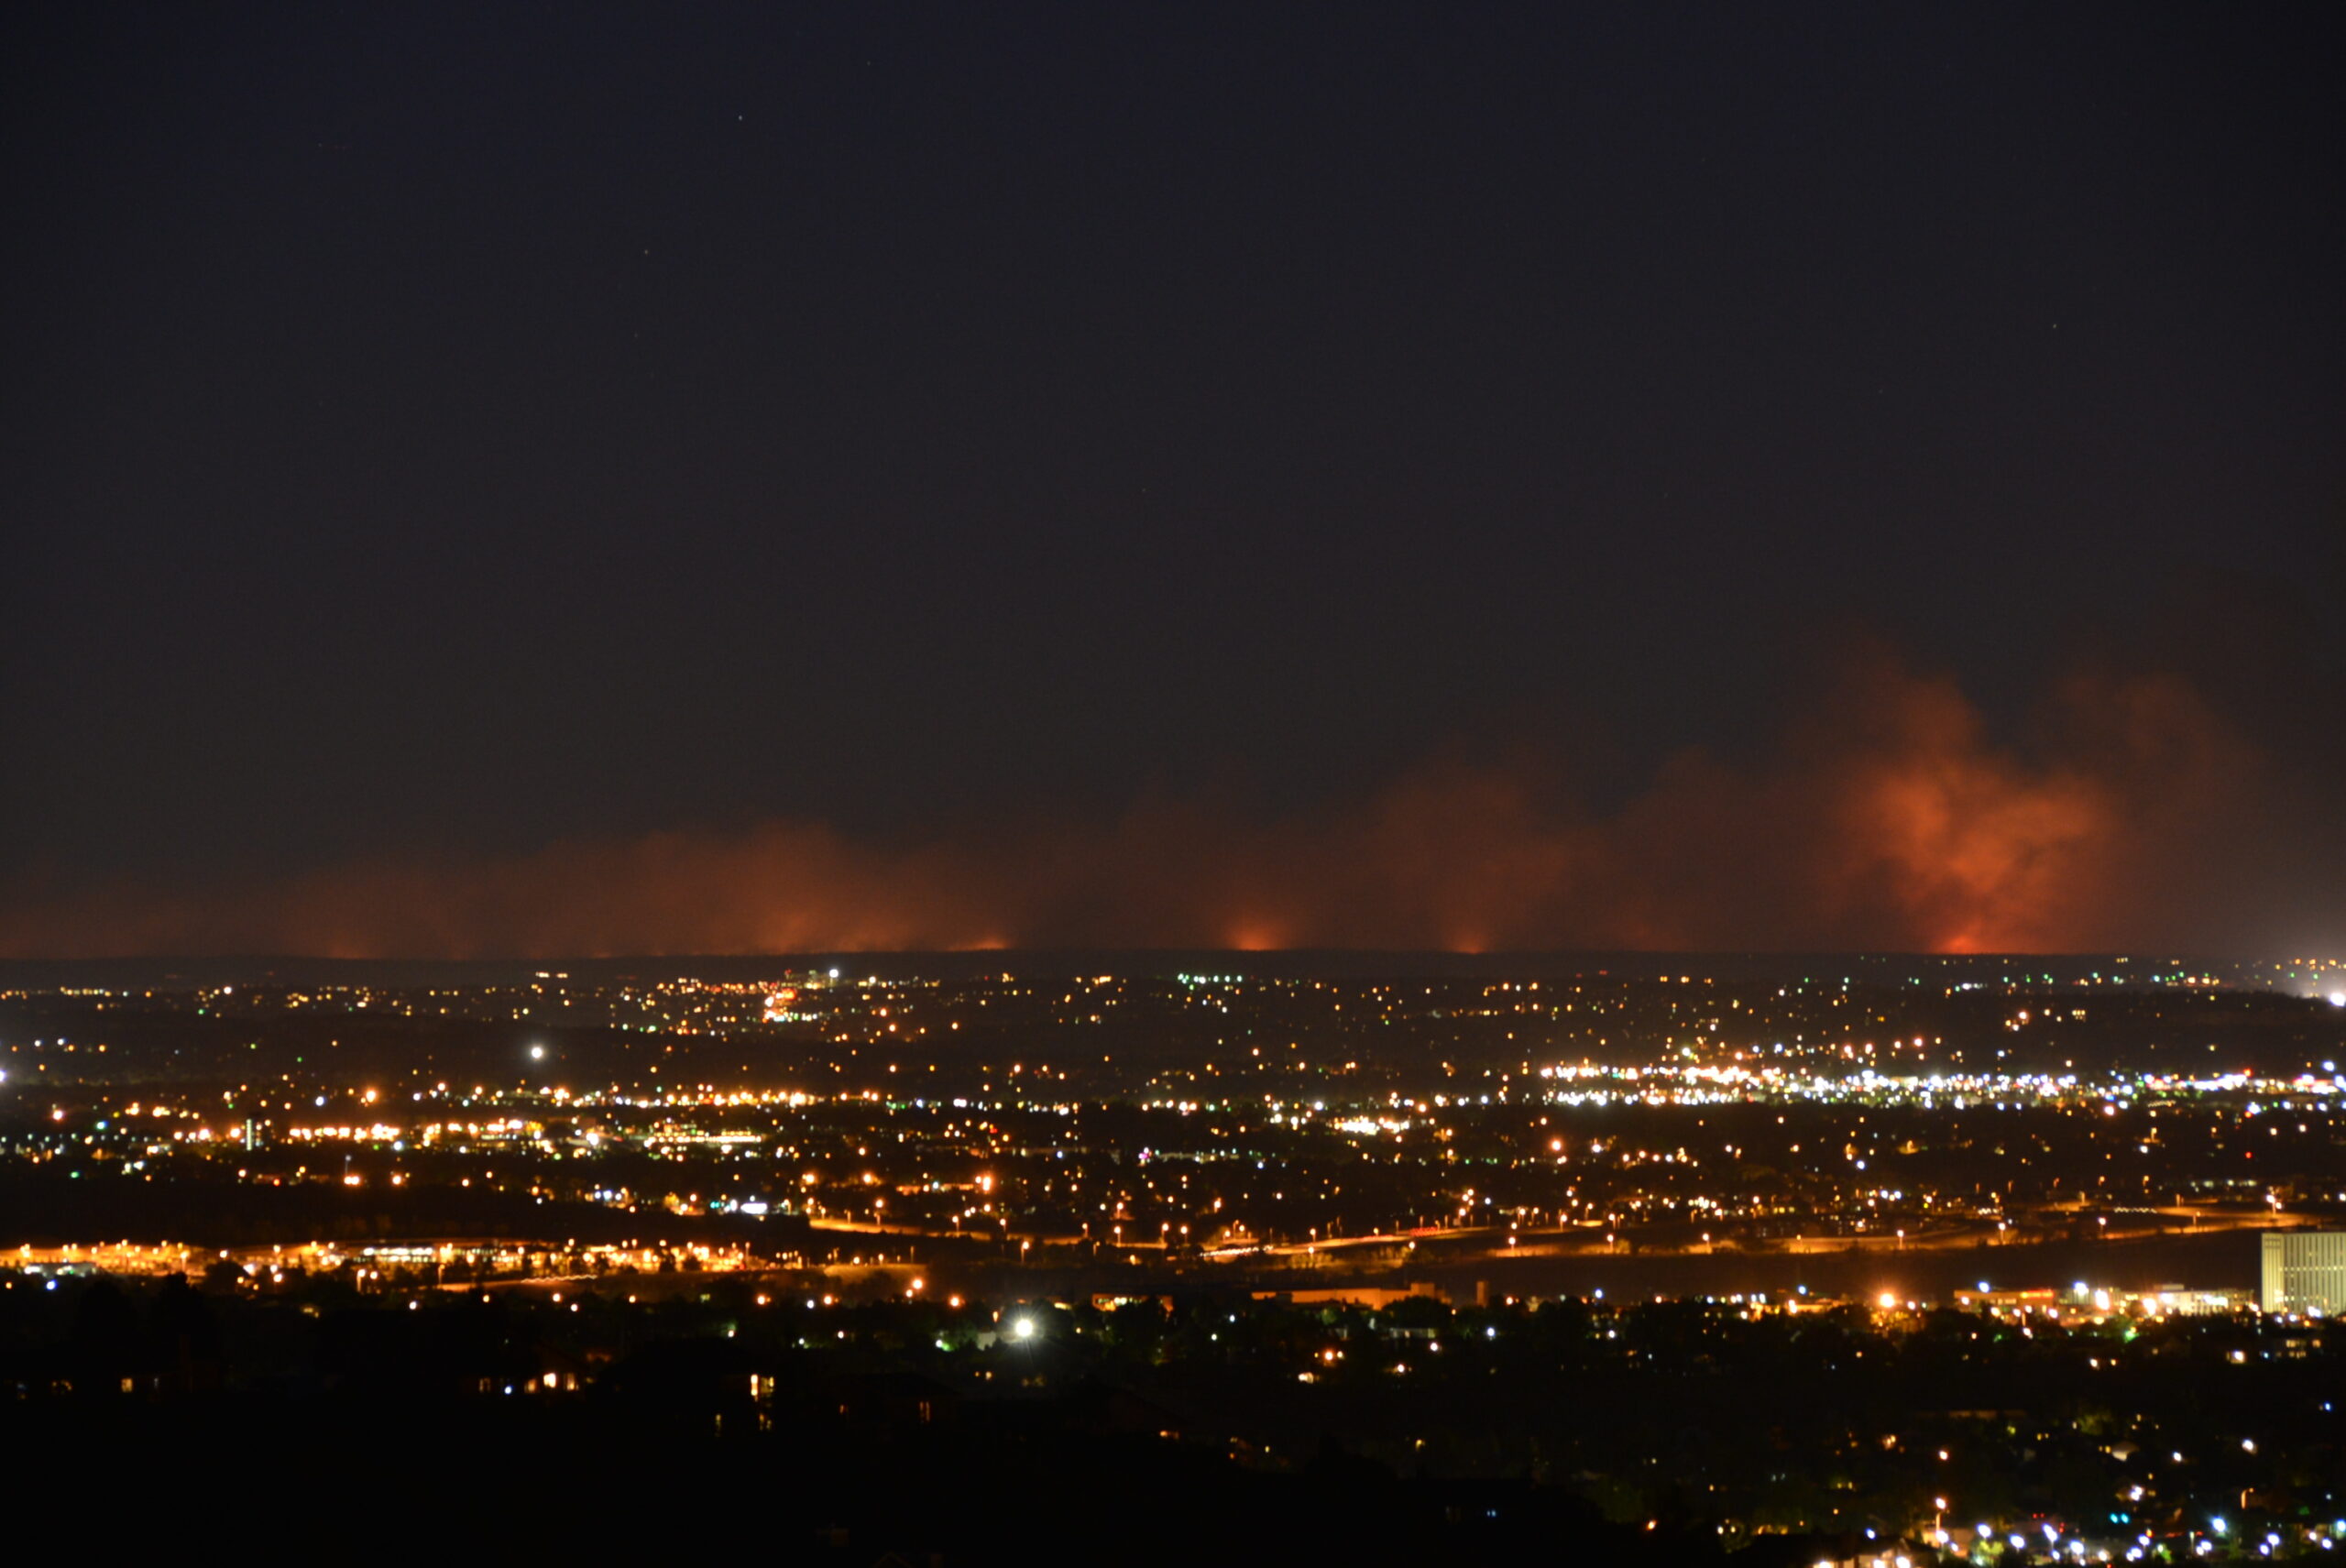 A night time image of the Black Forest Fire at 9:30 pm on the night of the first day, 11 June 2013. Photo was taken from the Broadmoor Bluffs neighborhood of Colorado Springs on the lower slope of Cheyenne Mountain, about 20 miles away.